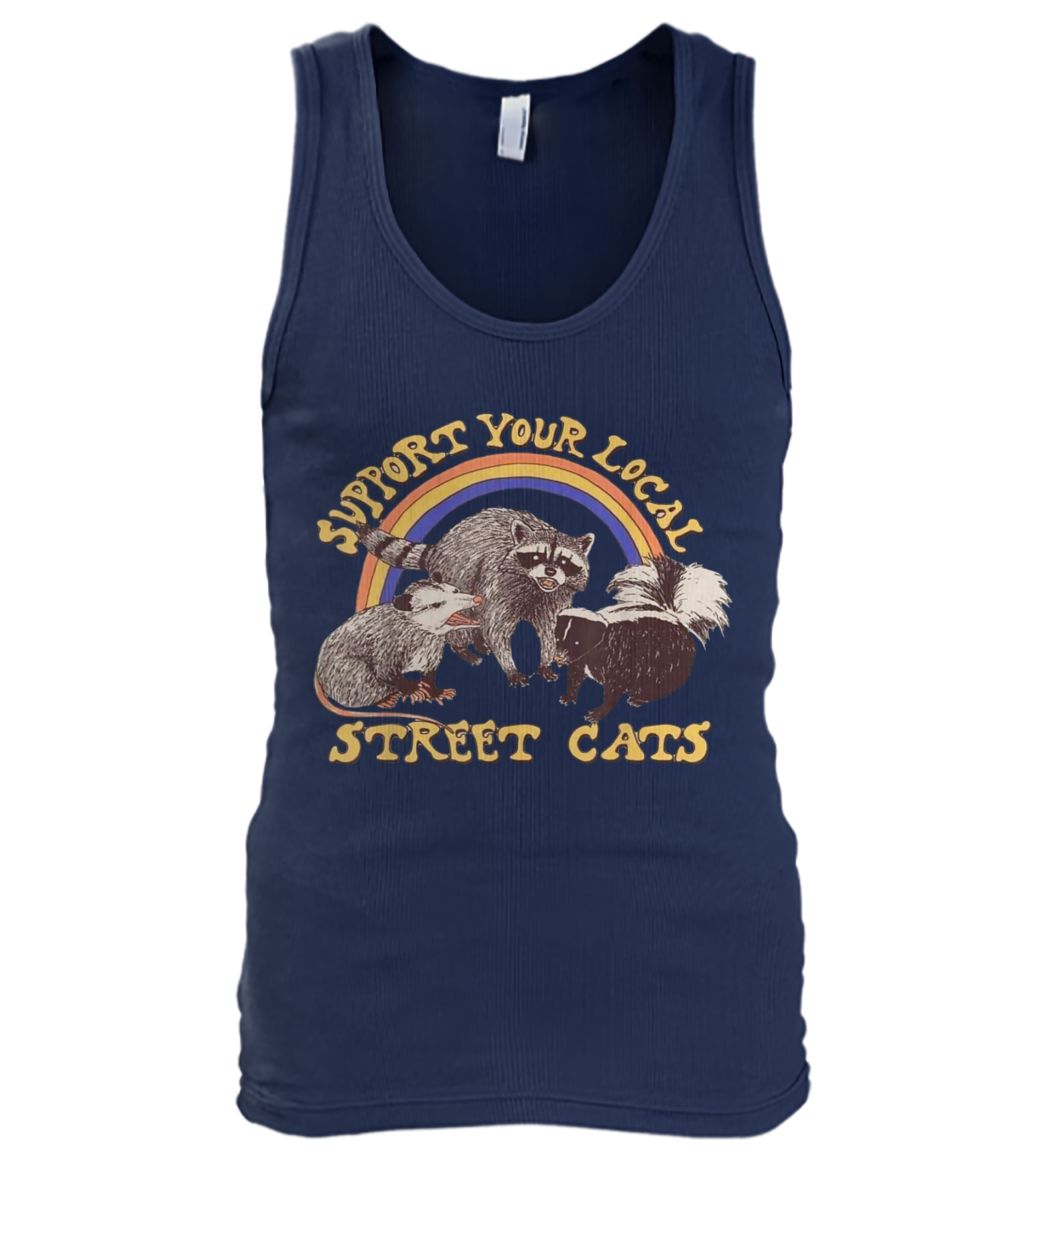 Support your local street cats men's tank top